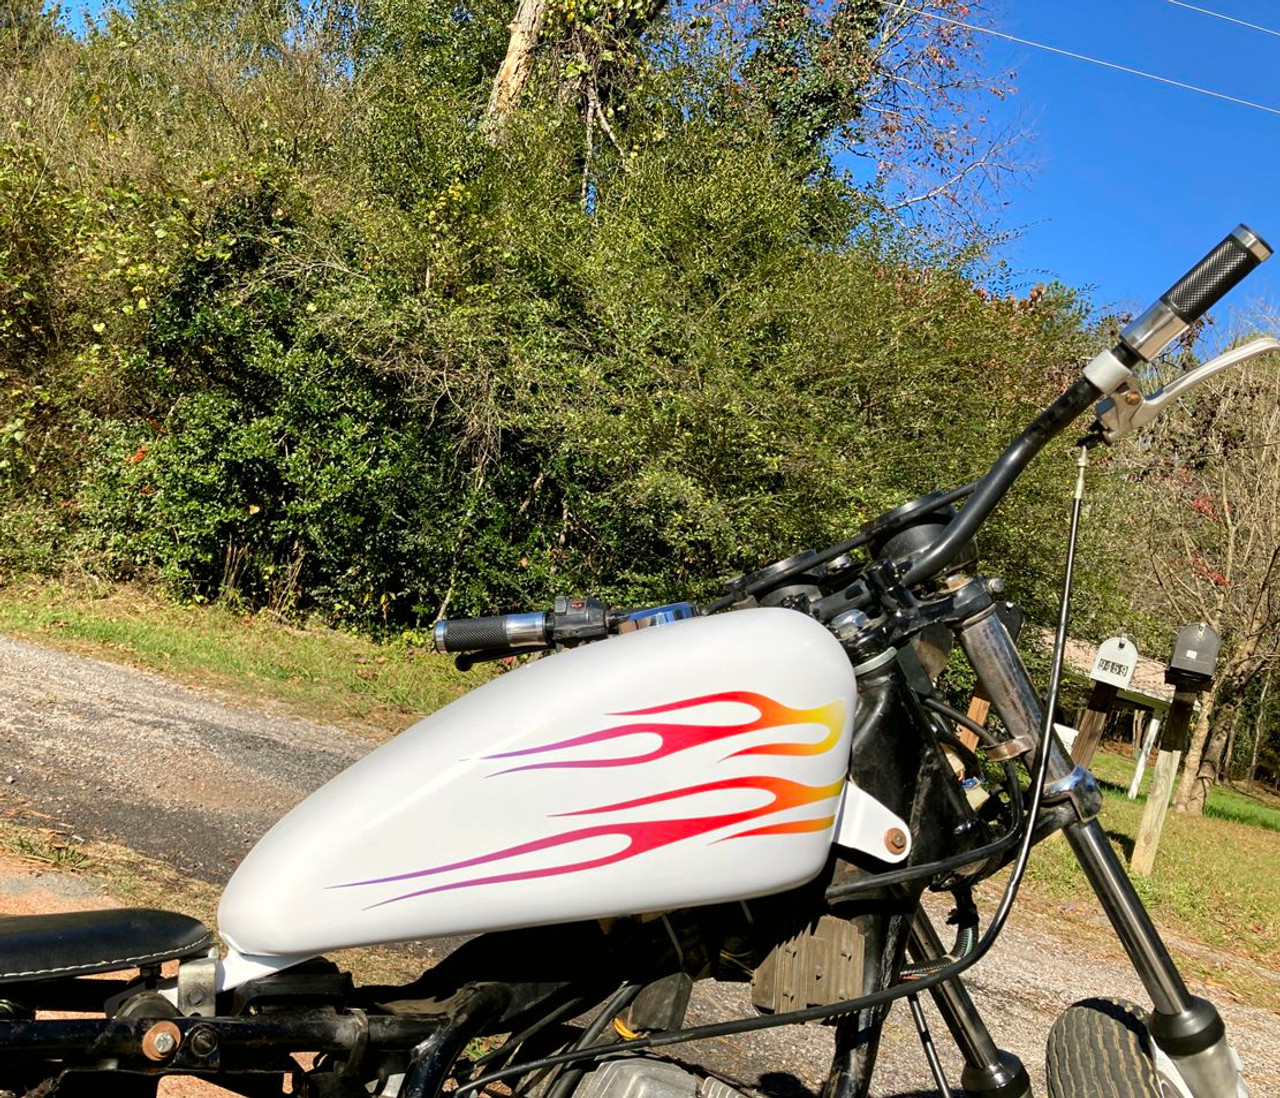 White hot fire grape shown
on a 3.3 gal sportster tank